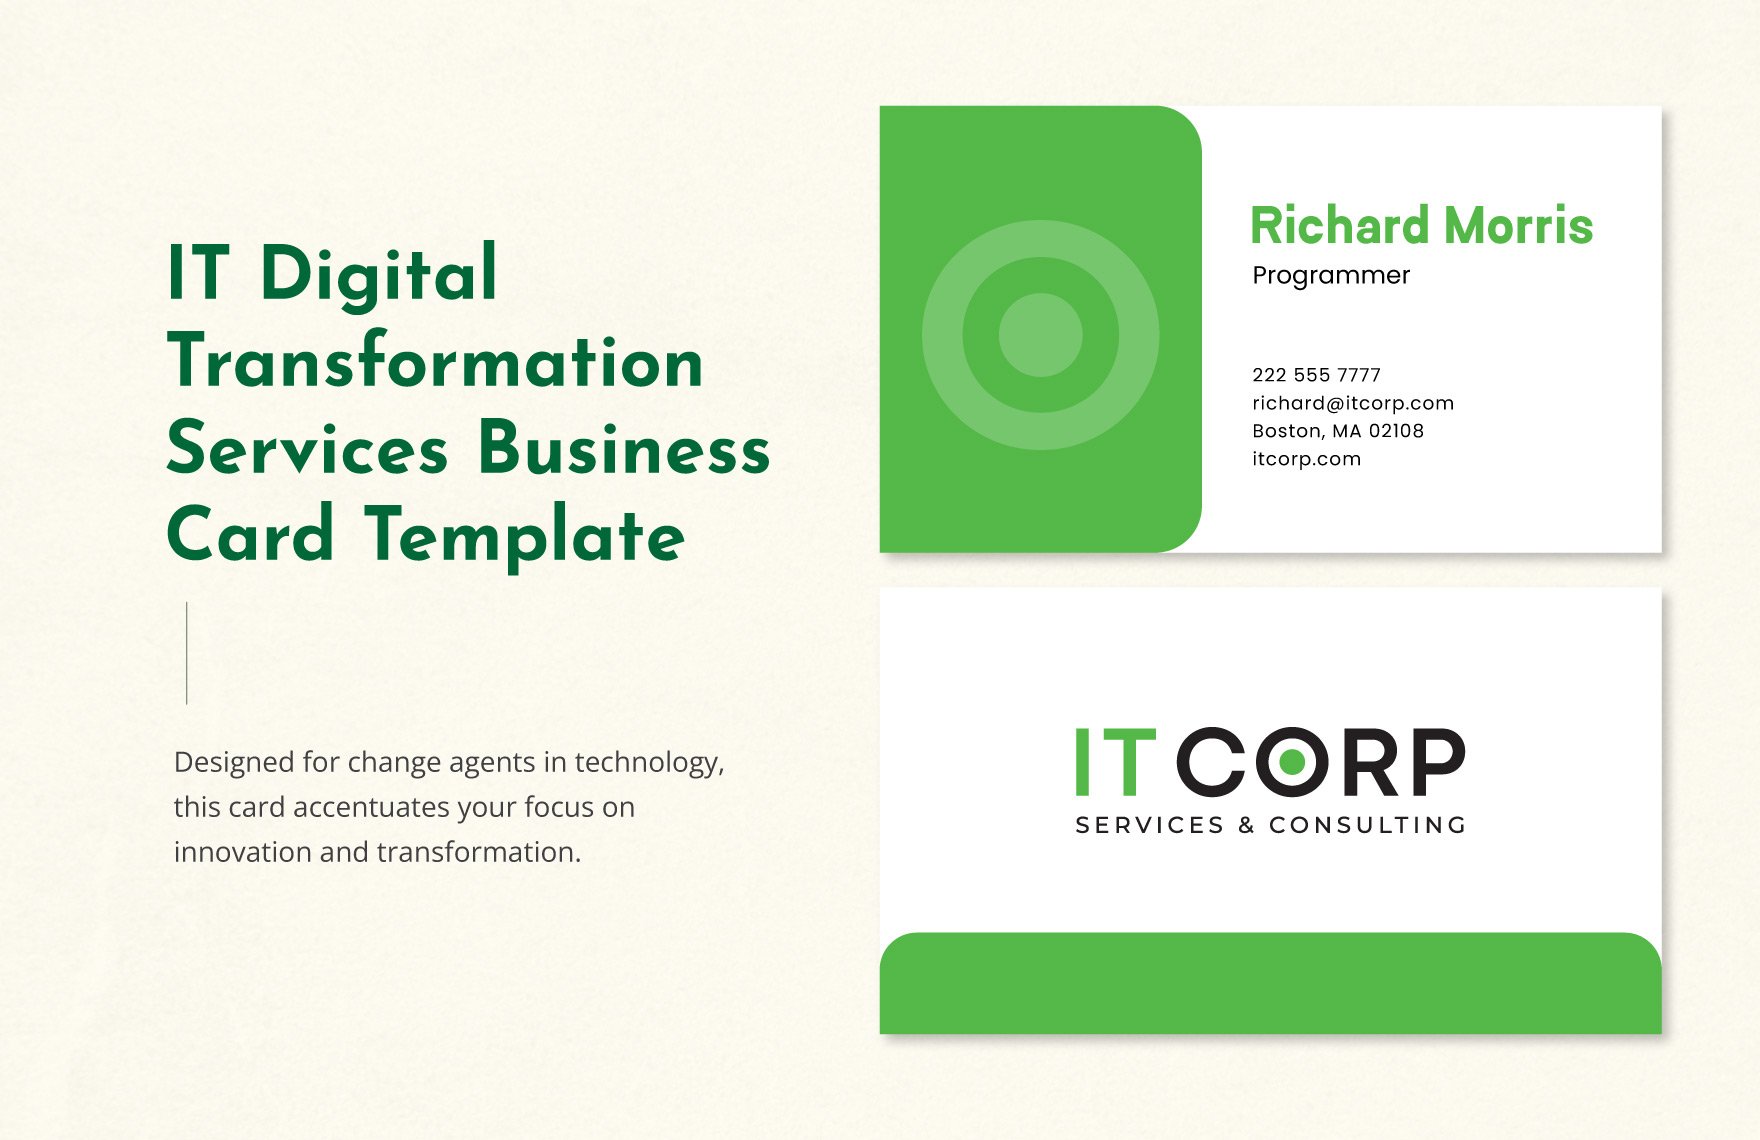 IT Digital Transformation Services Business Card Template